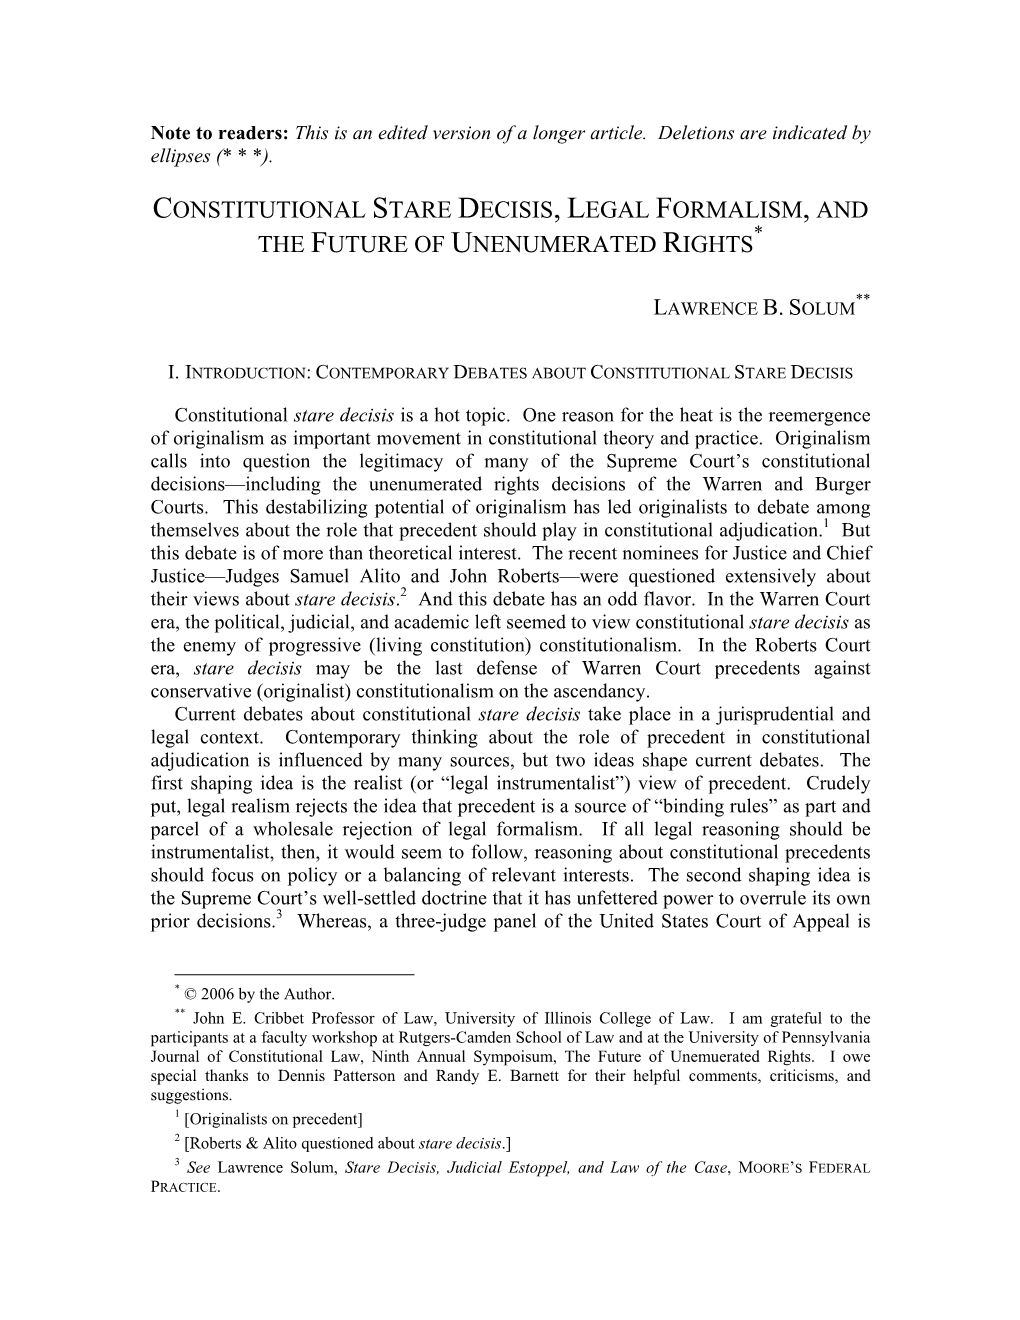 Constitutional Stare Decisis, Legal Formalism, and the Future of Unenumerated Rights*